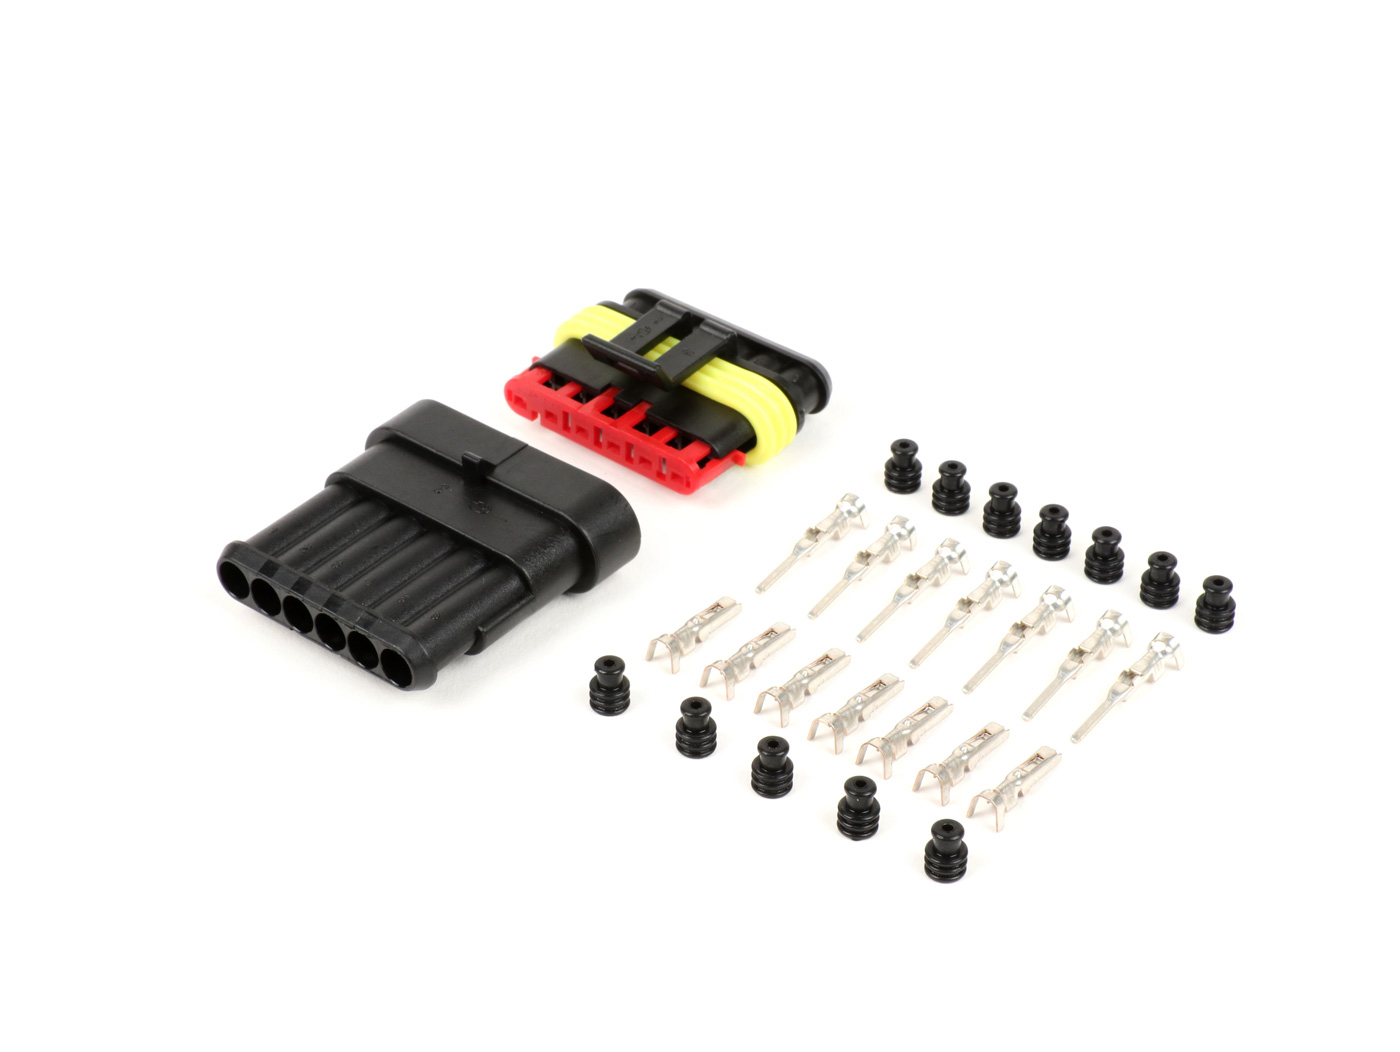 Plug Set For Wiring Harness -BGM PRO-type Series 060 AM SpecialSeal, 0.85-1.25mm², Waterproof - 6 Contact Plugs